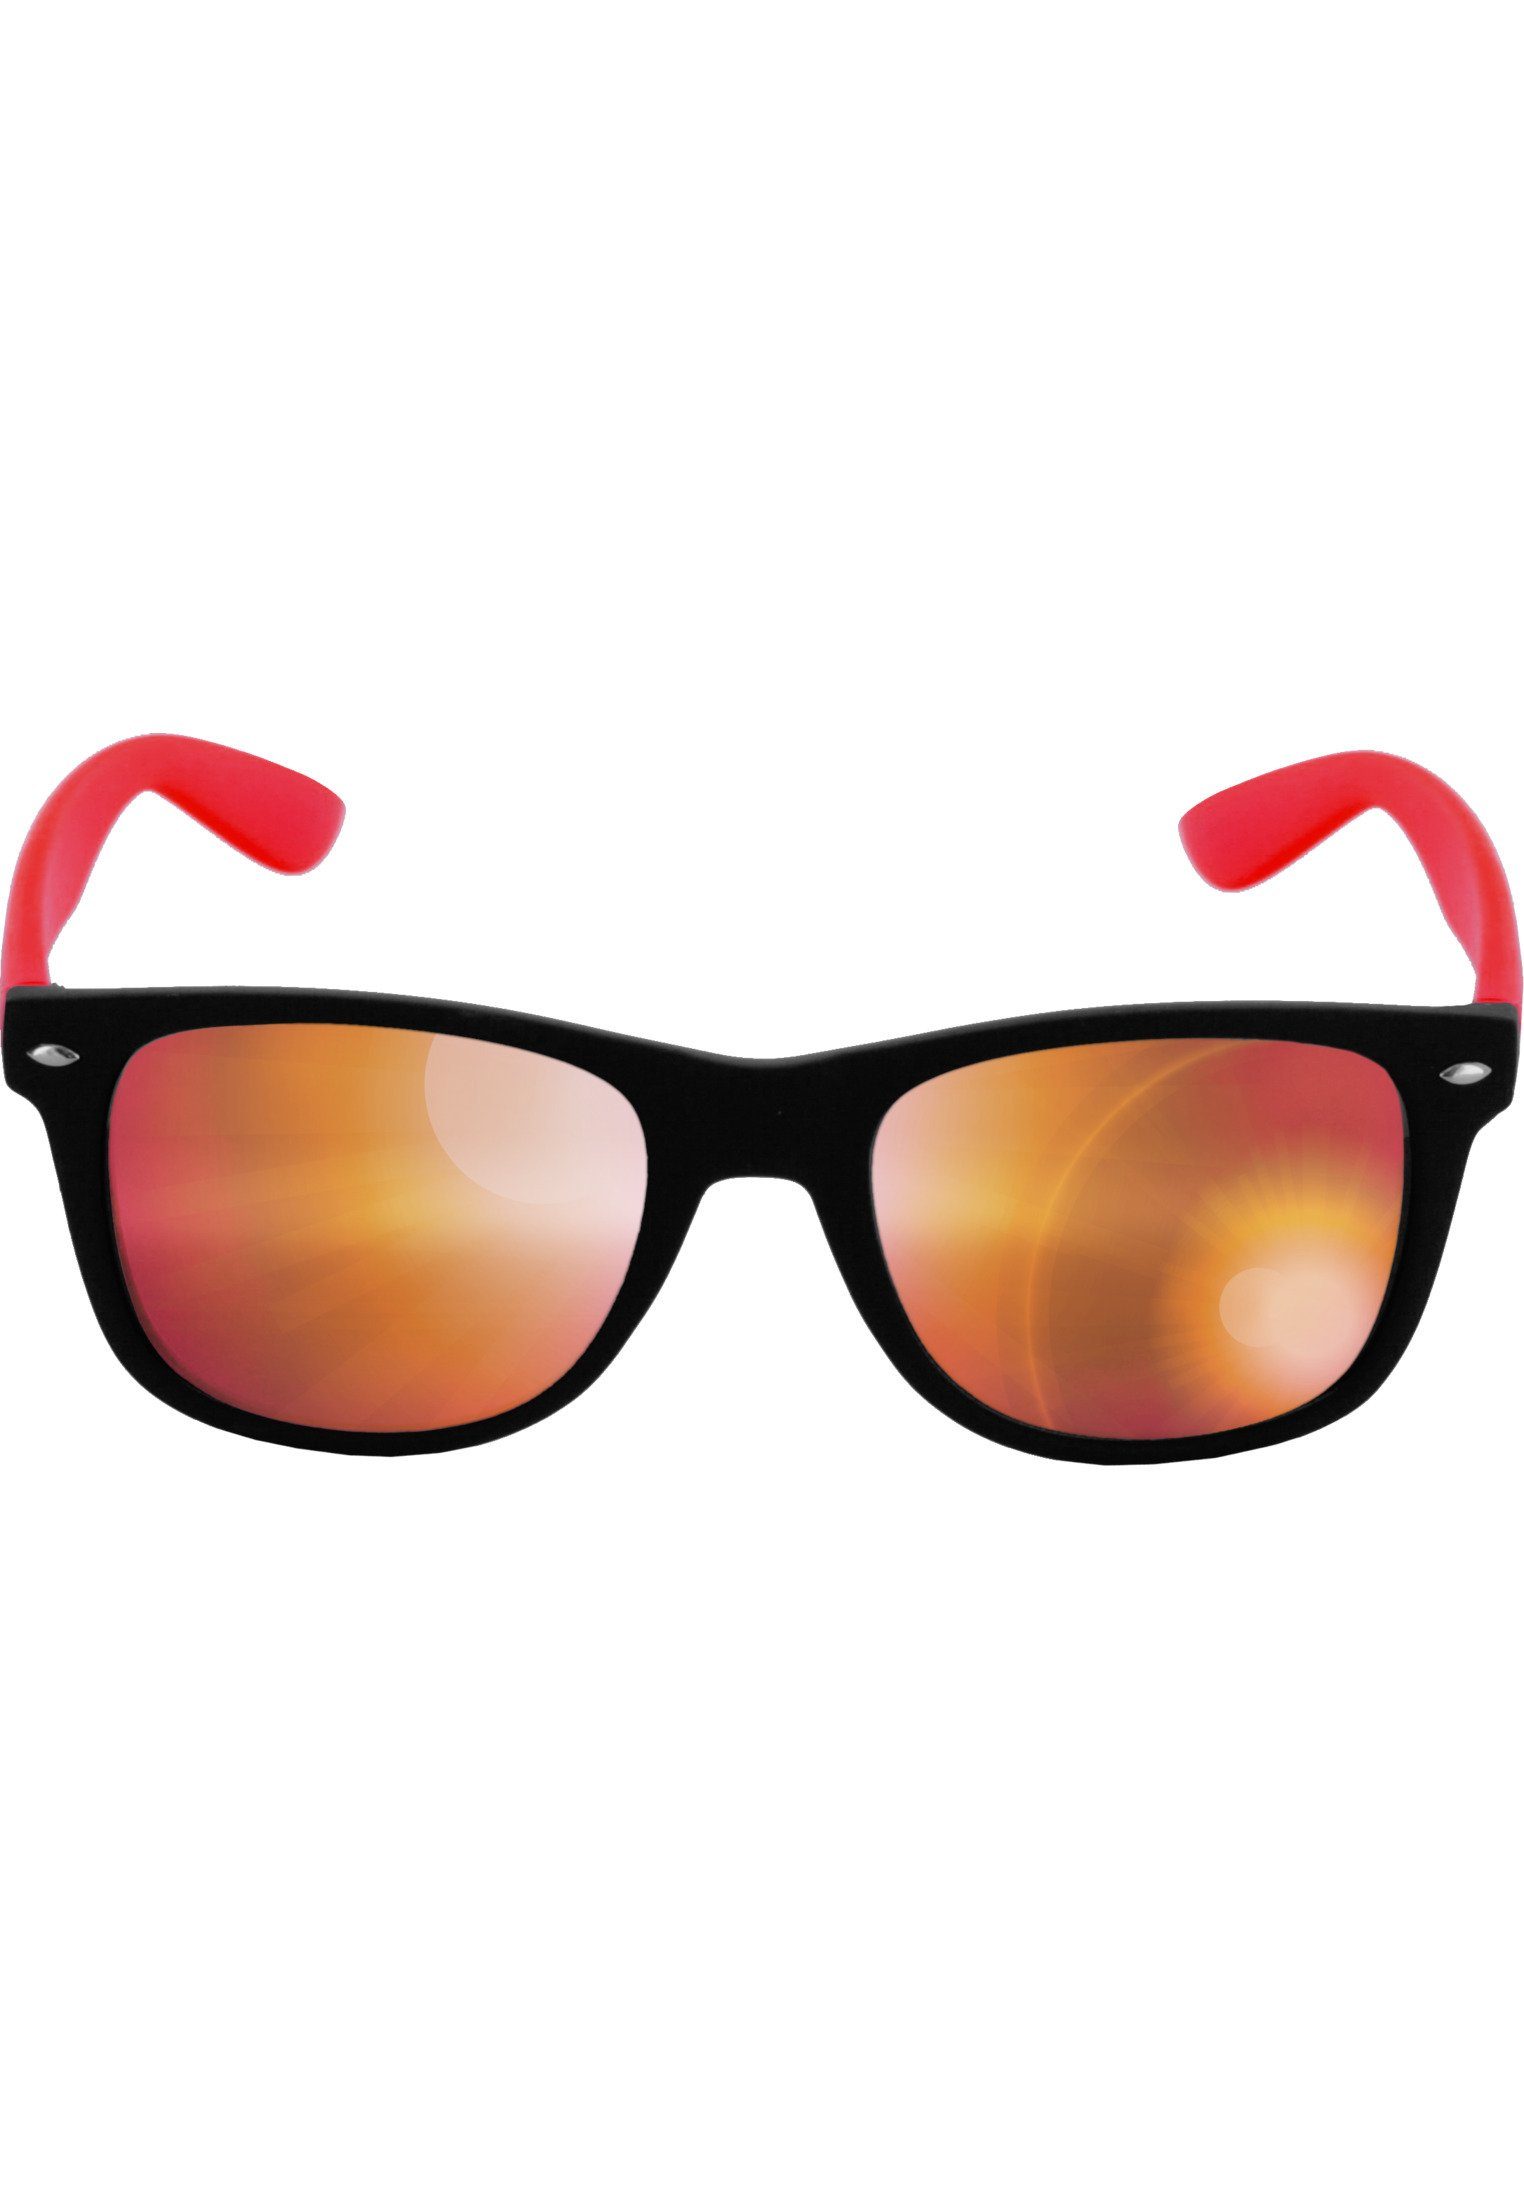 MSTRDS Sonnenbrille Accessoires Sunglasses Likoma Mirror blk/red/red